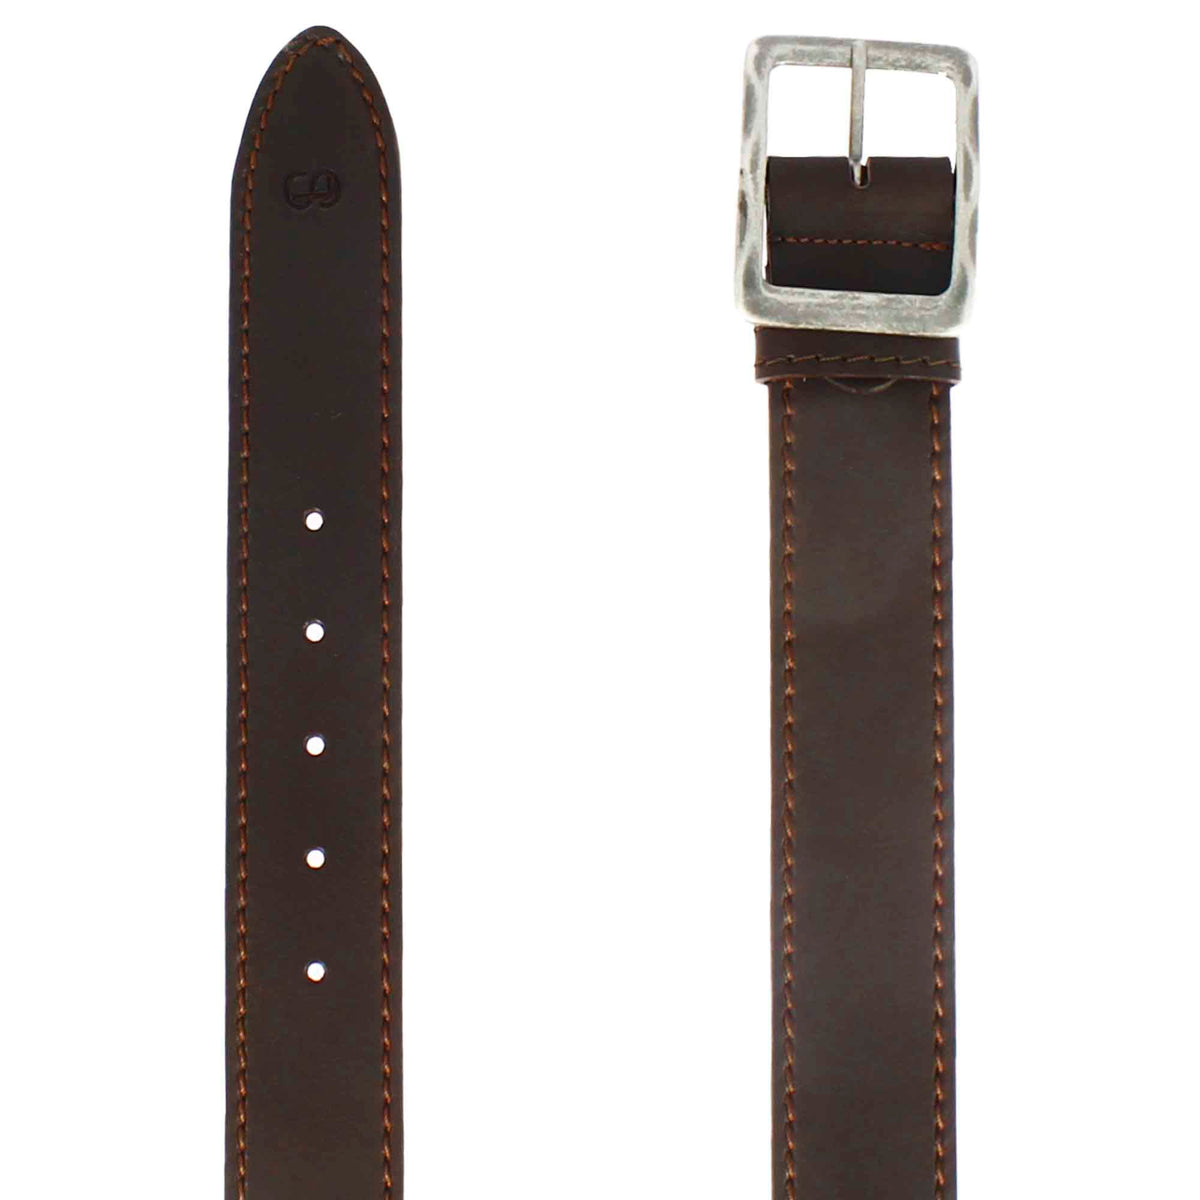 Classic men's belt in dark brown leather with stitching